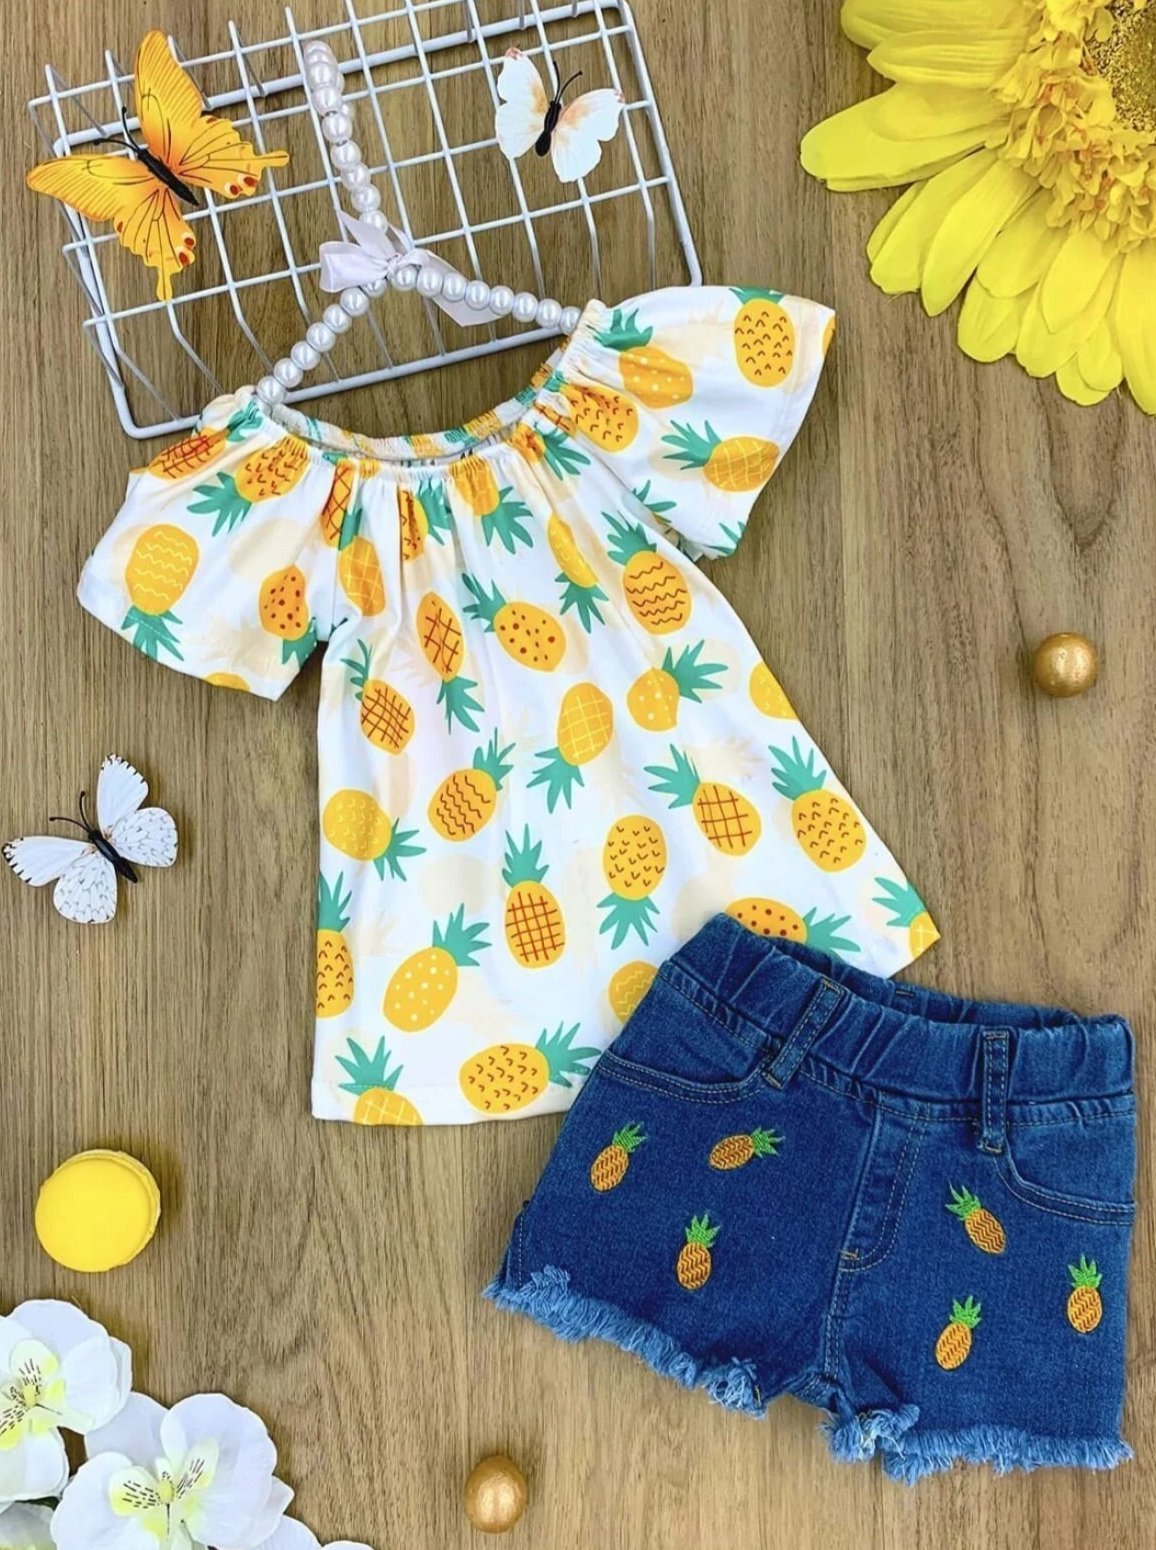 Girls Pinapple Print Top and Patched Denim Shorts Set - Yellow / 2T - Girls Spring Casual Set